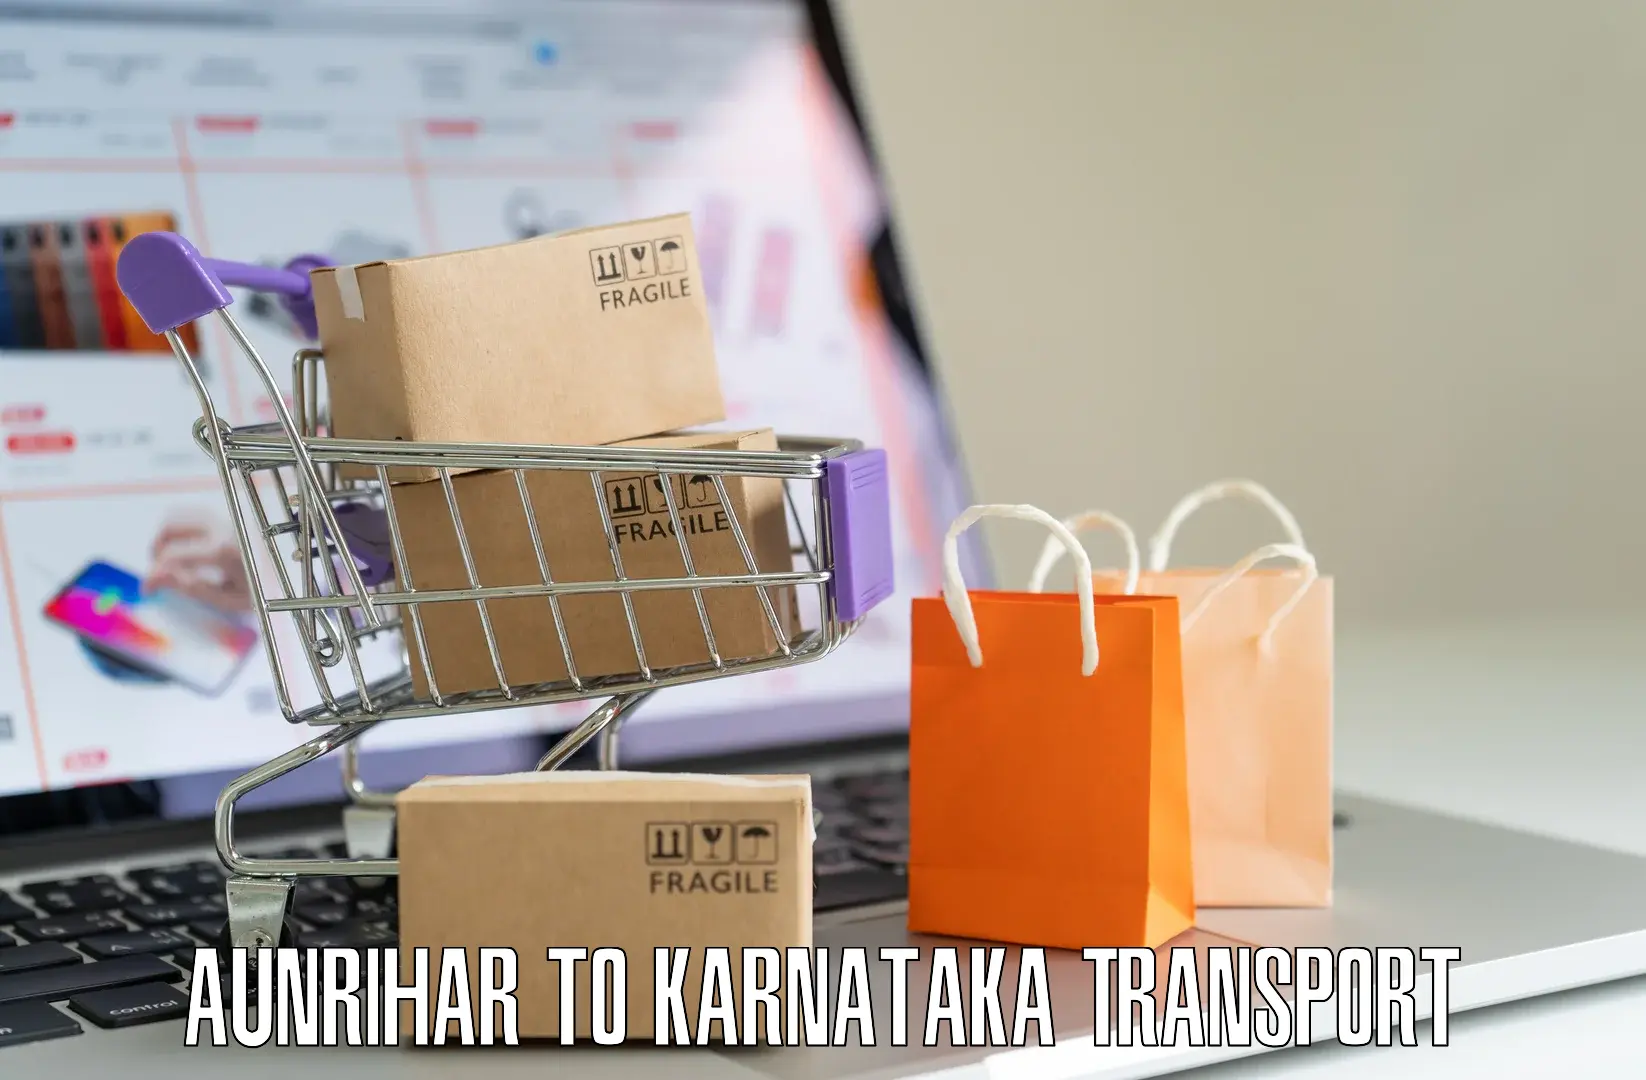 Two wheeler parcel service Aunrihar to Athani